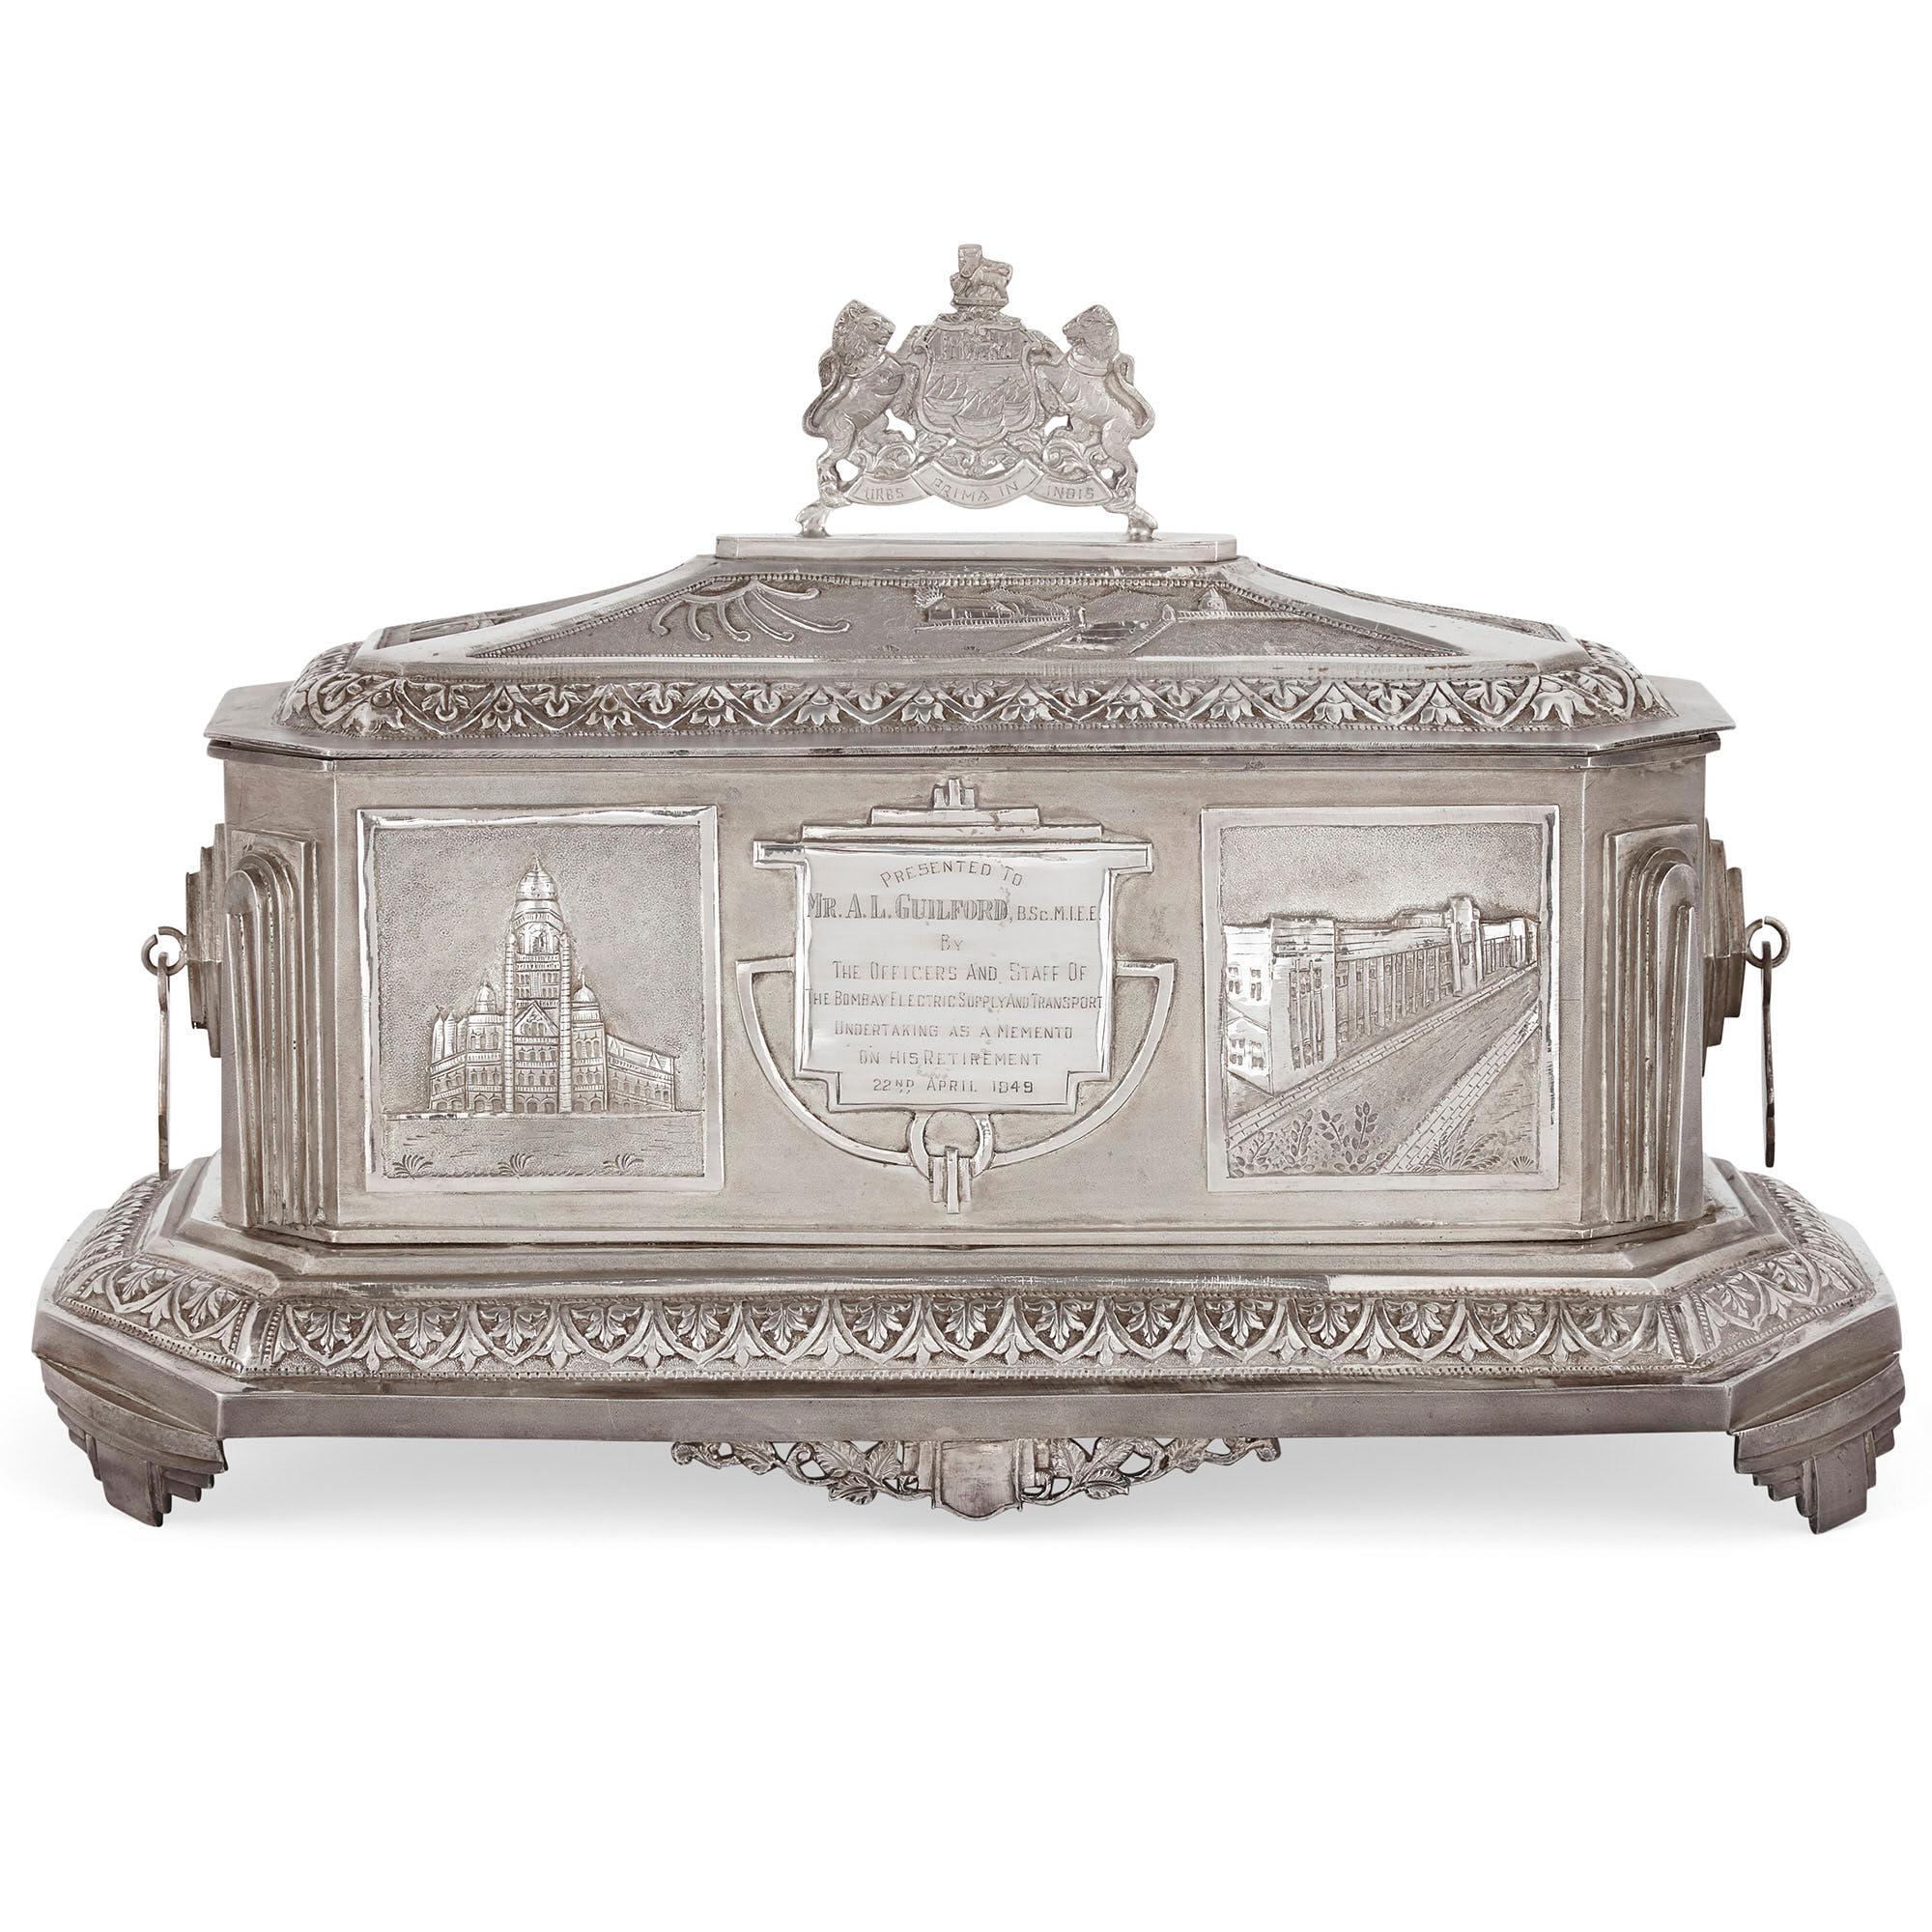 This Anglo-Indian silver casket is inscribed on a central panel to the front with the following: 'Presented to / Mr. A. L. Guildford, B.Sc. M.I.E.E. / By / The Officers and Staff of / The Bombay Electrical Supply and Transport / Undertaking as a